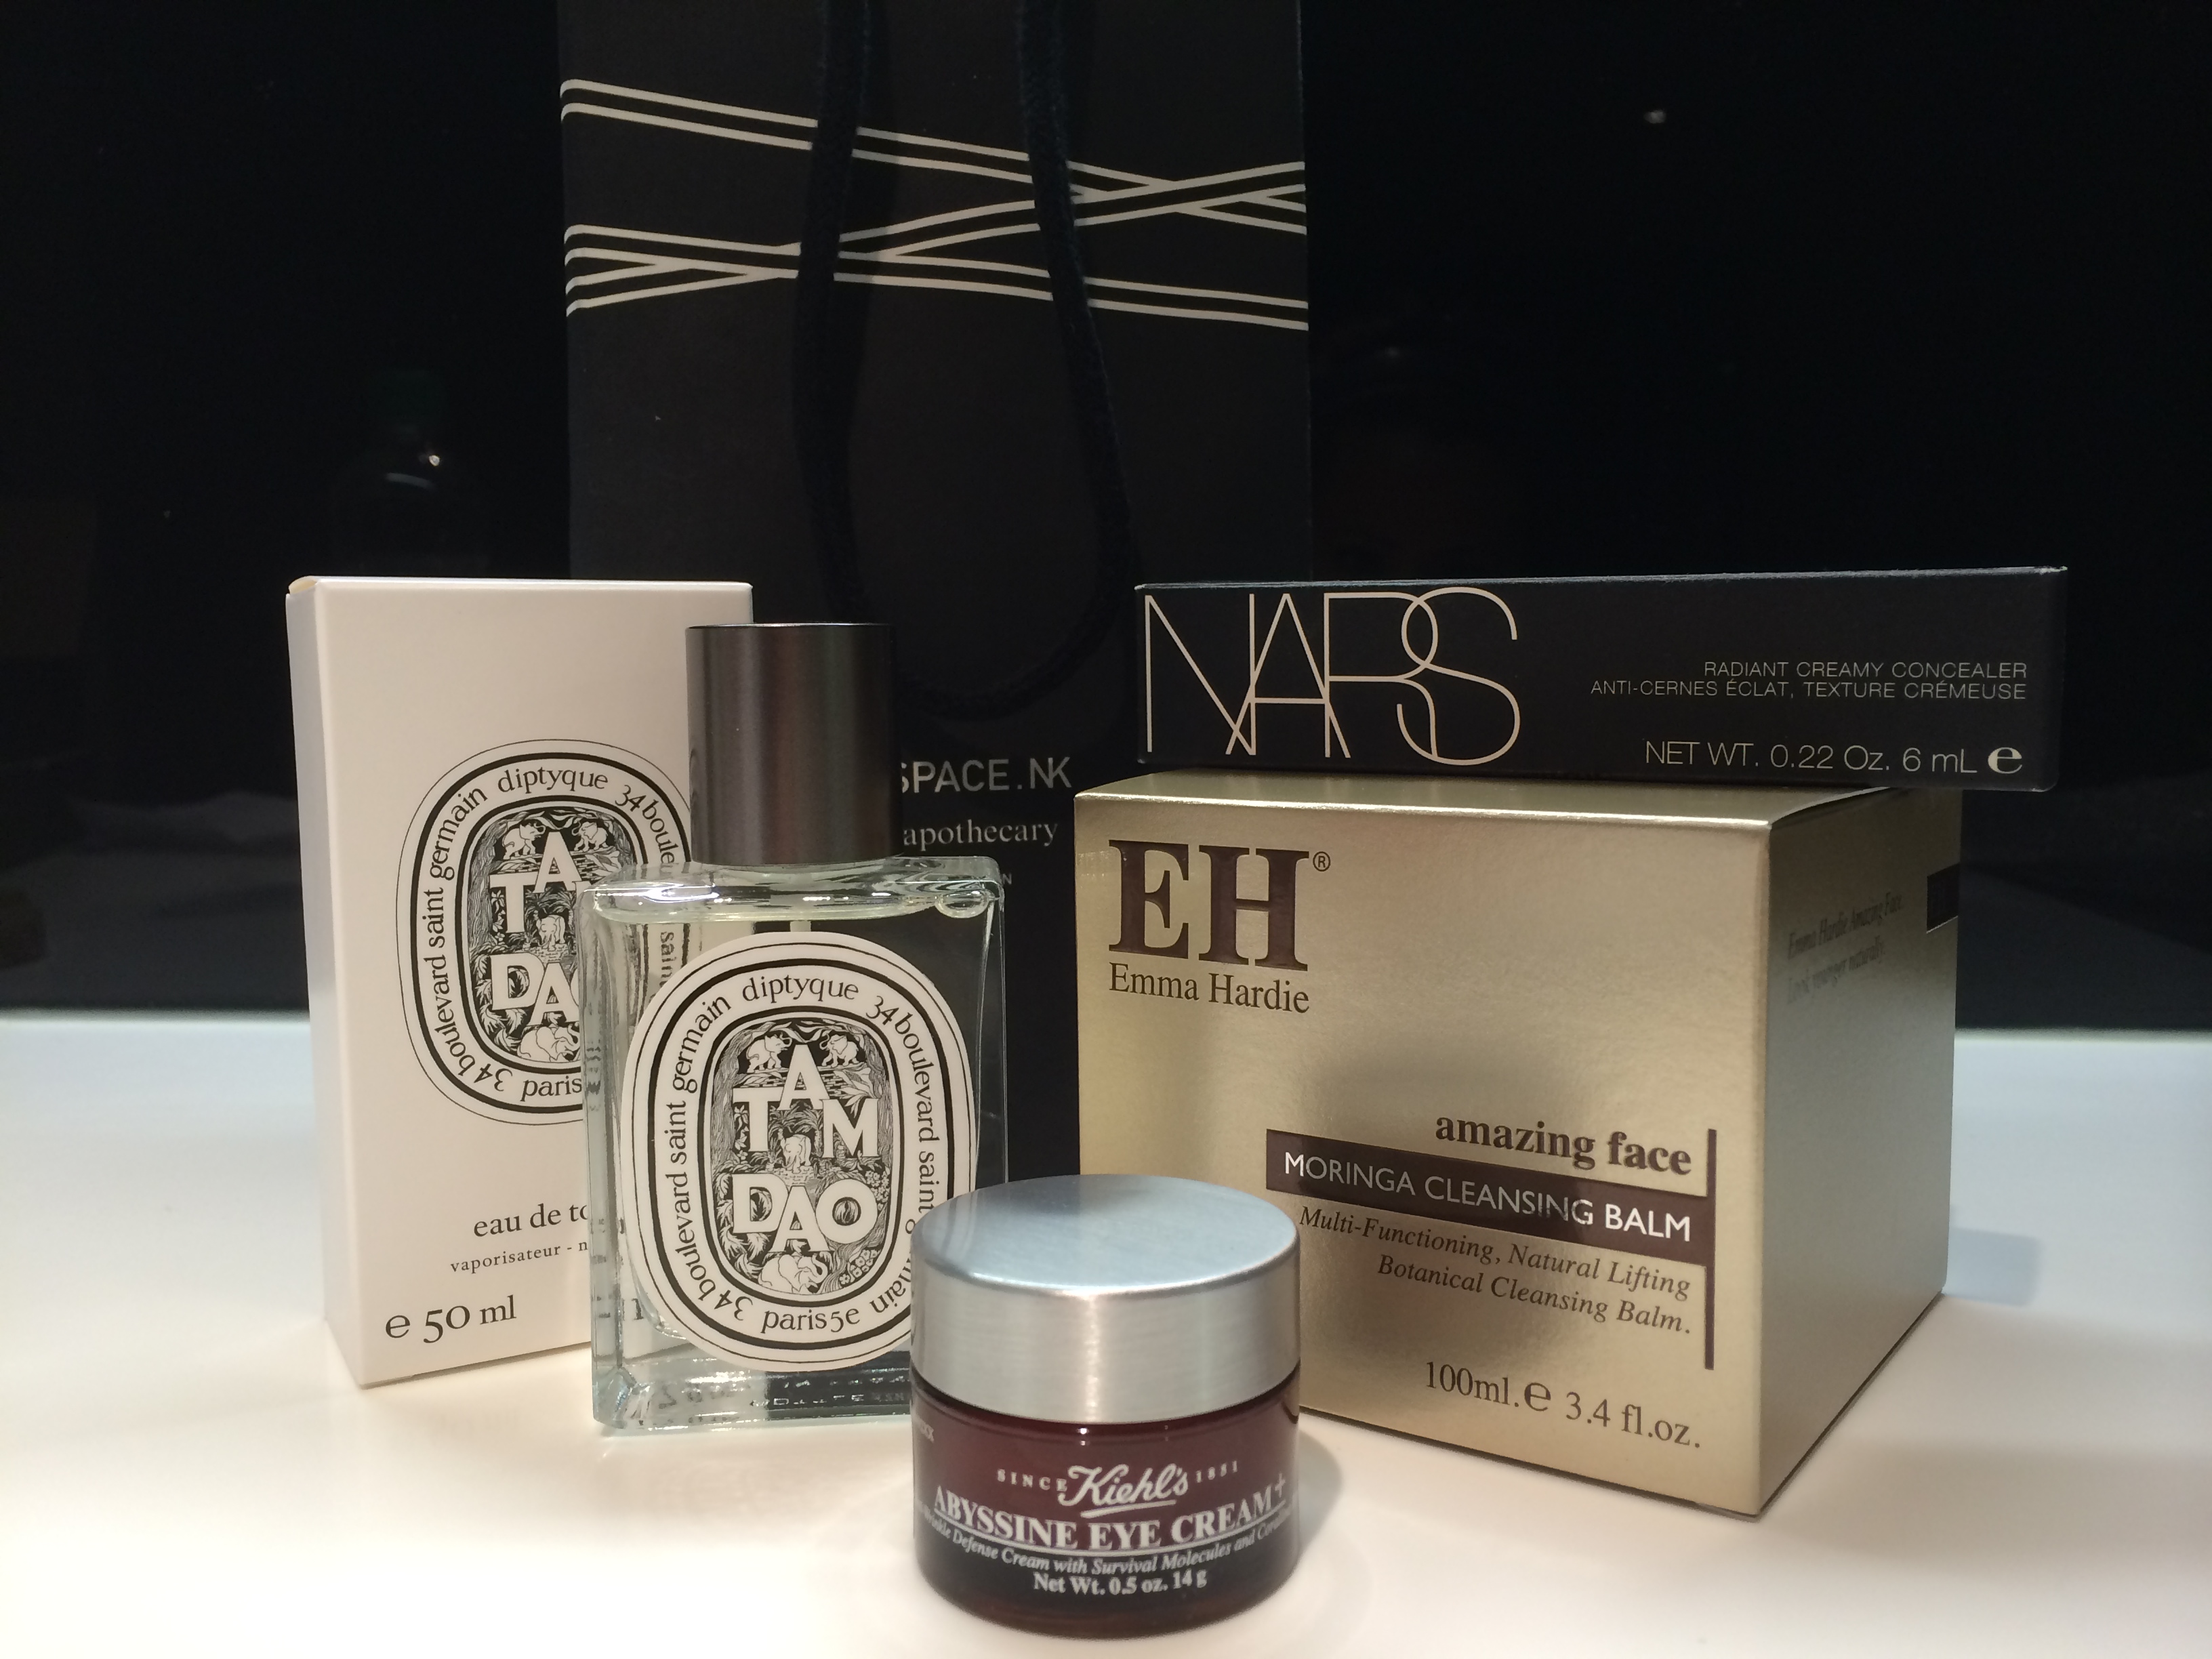 The Space NK Haul